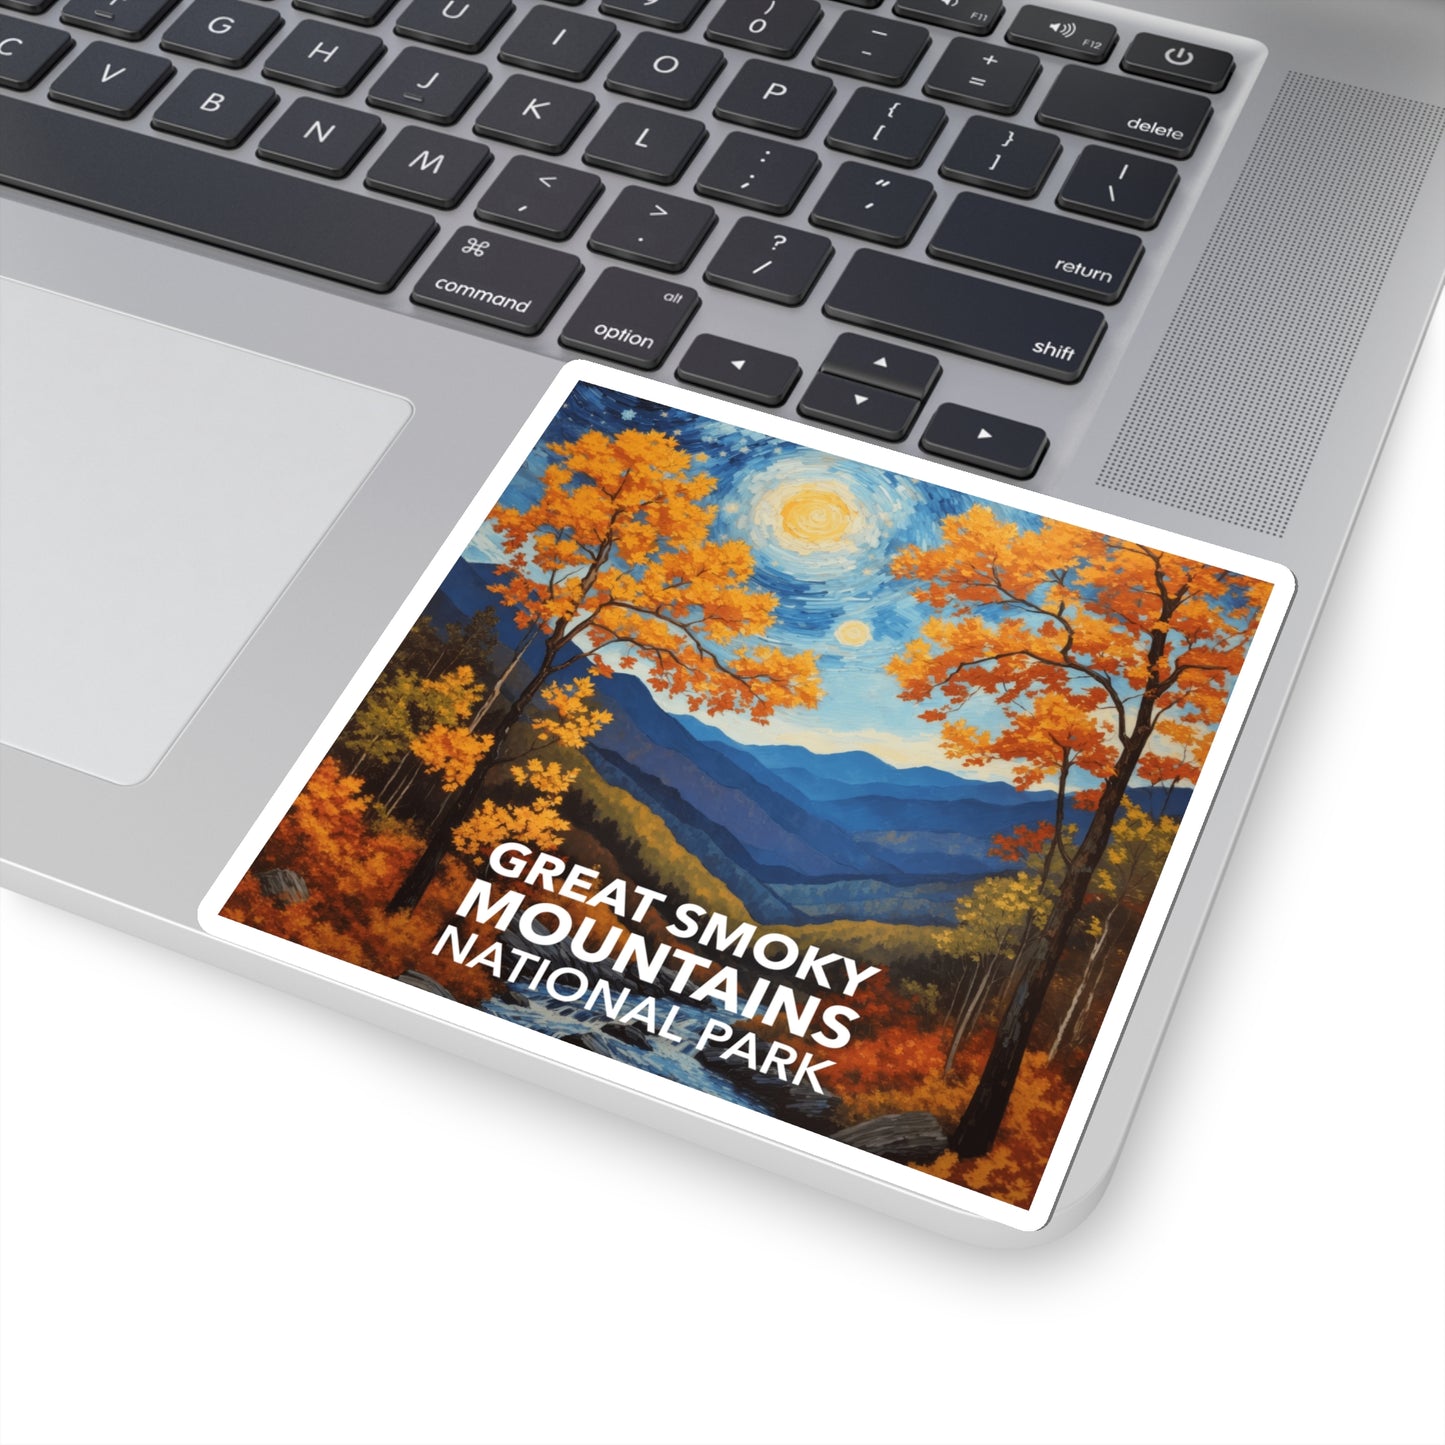 Great Smoky Mountains National Park Sticker - The Starry Night